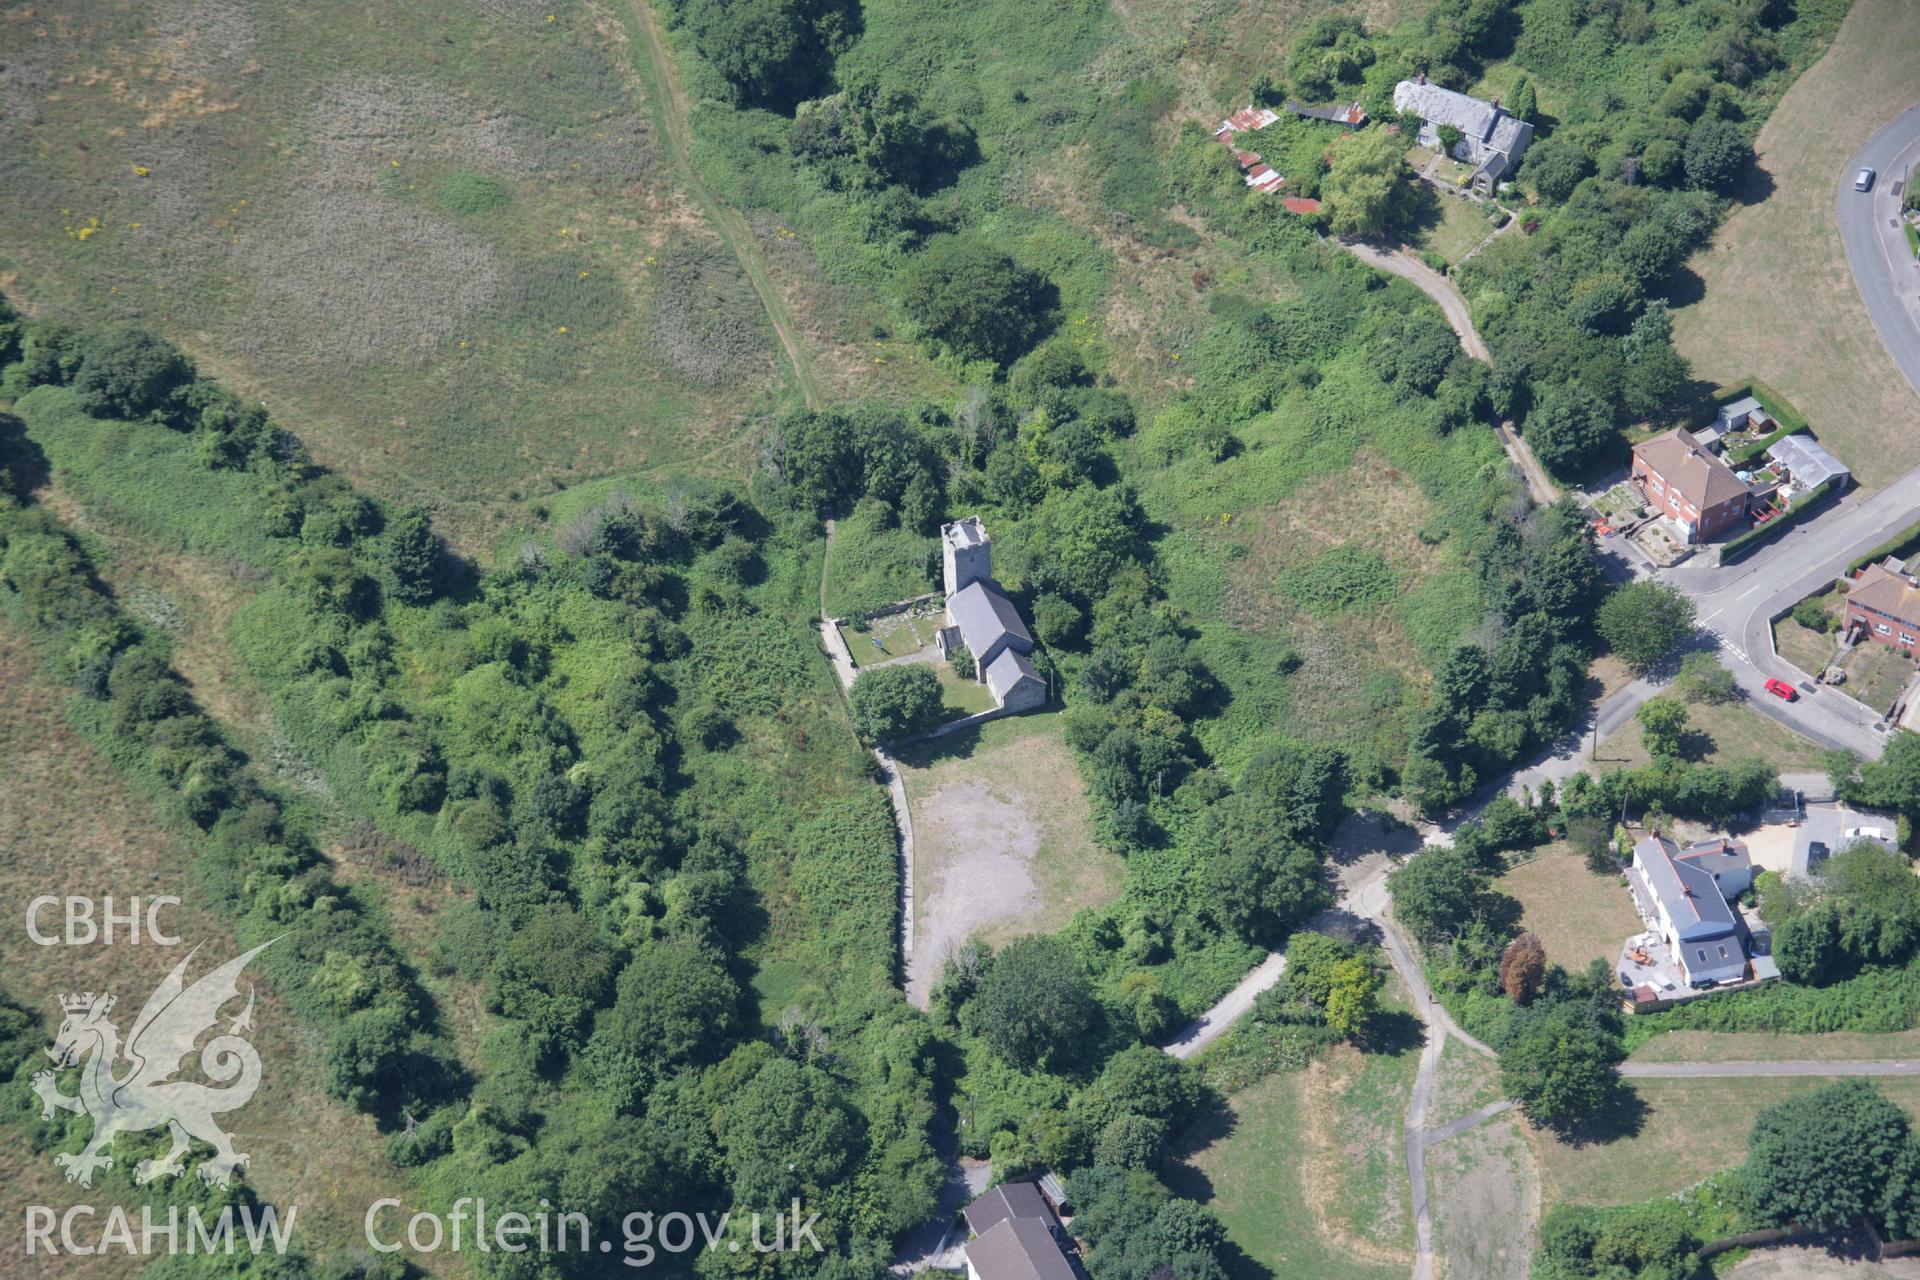 RCAHMW colour oblique aerial photograph of Saints Dyfan and Teilo Church, Merthyr Dyfan Road. Taken on 24 July 2006 by Toby Driver.